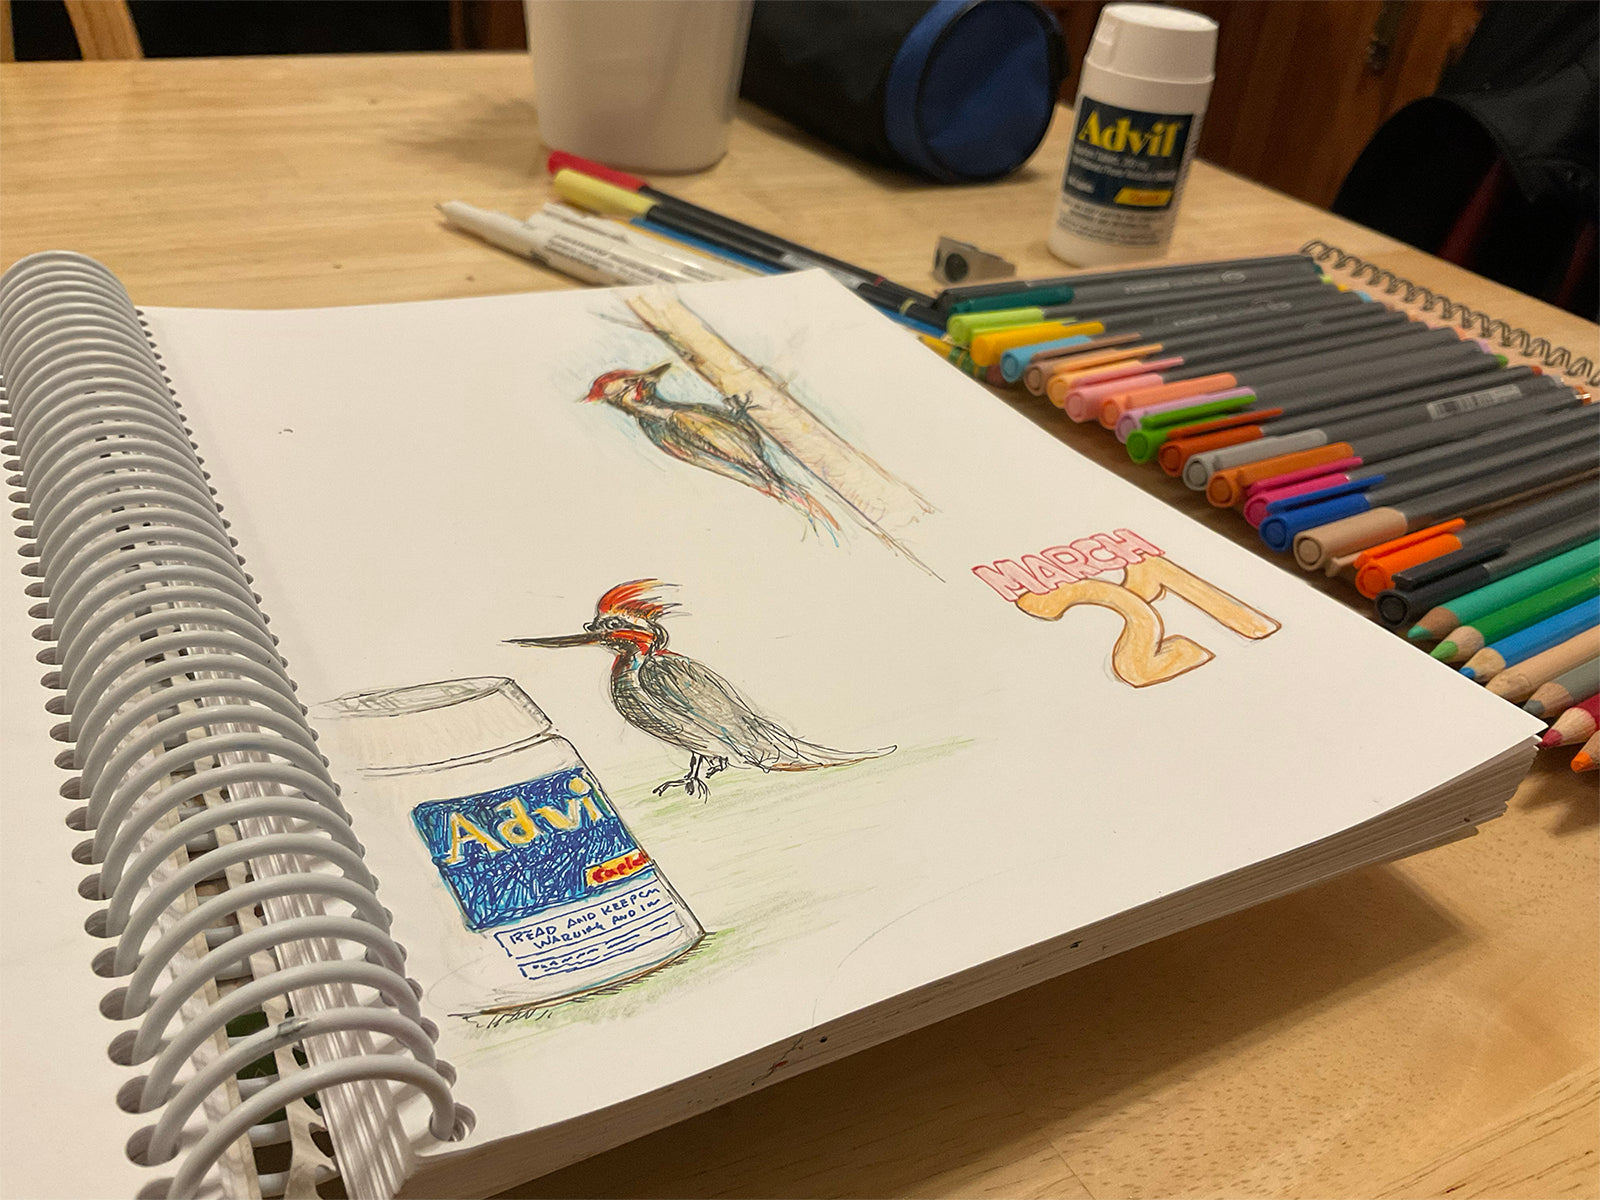 Start a daily doodle journal, daily doodling, woodpecker drawing, advil drawing